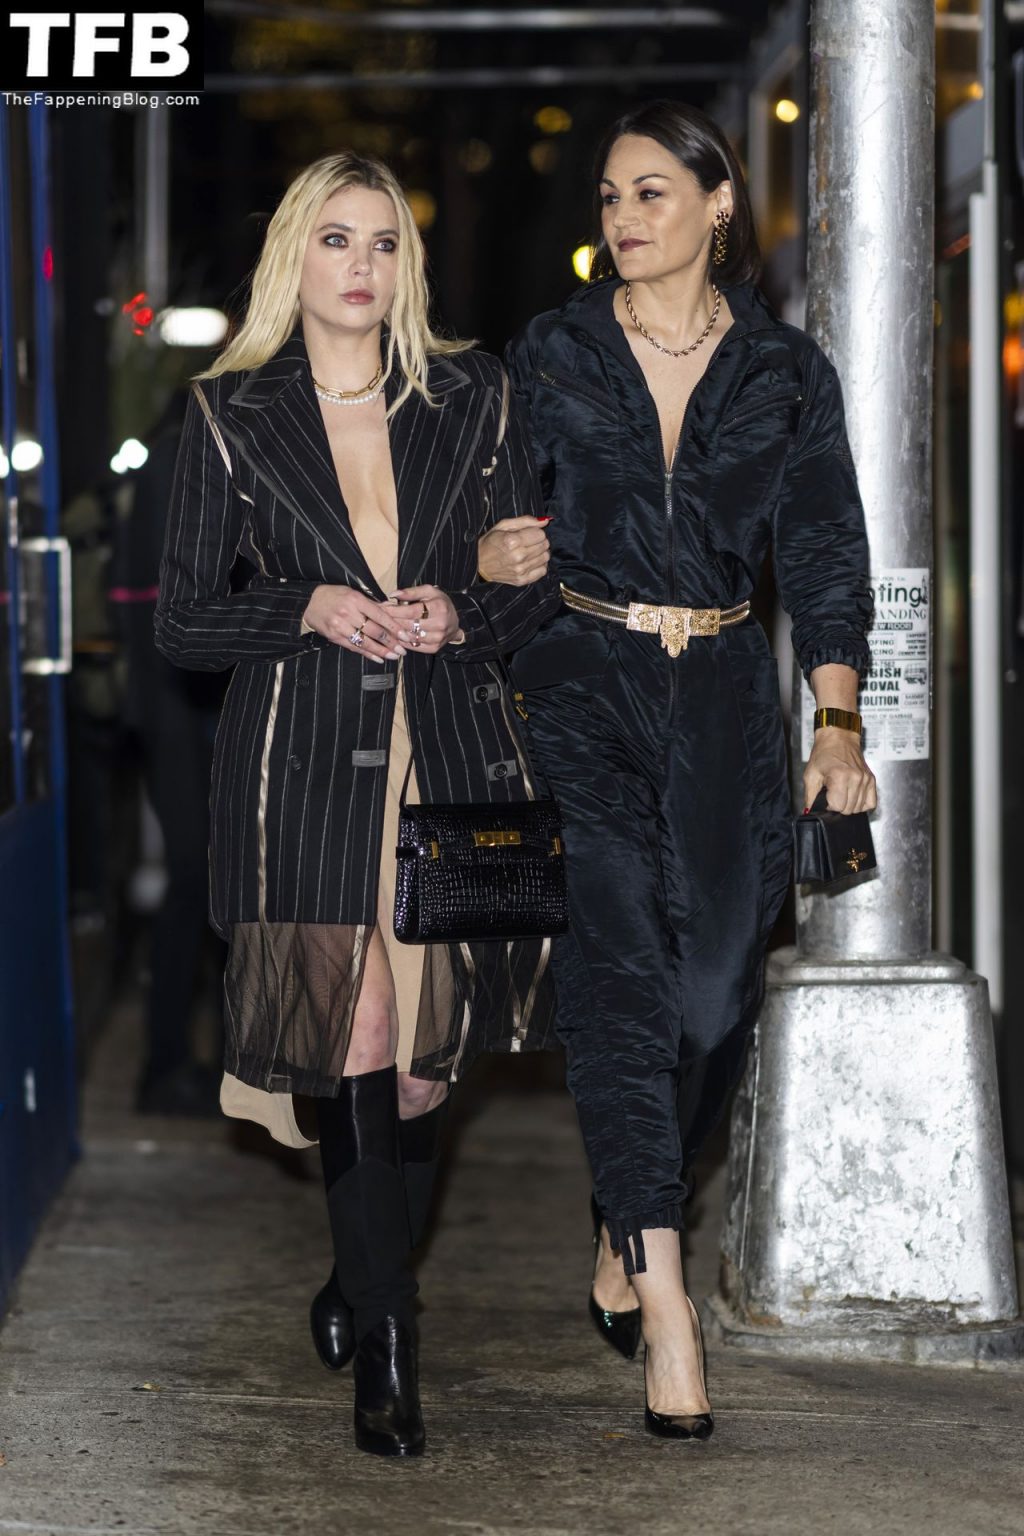 Ashley Benson Sexy The Fappening Blog 1 1024x1536 - Ashley Benson and a Girlfriend Look Fashionable as They Head to Dinner in NYC (5 Photos)